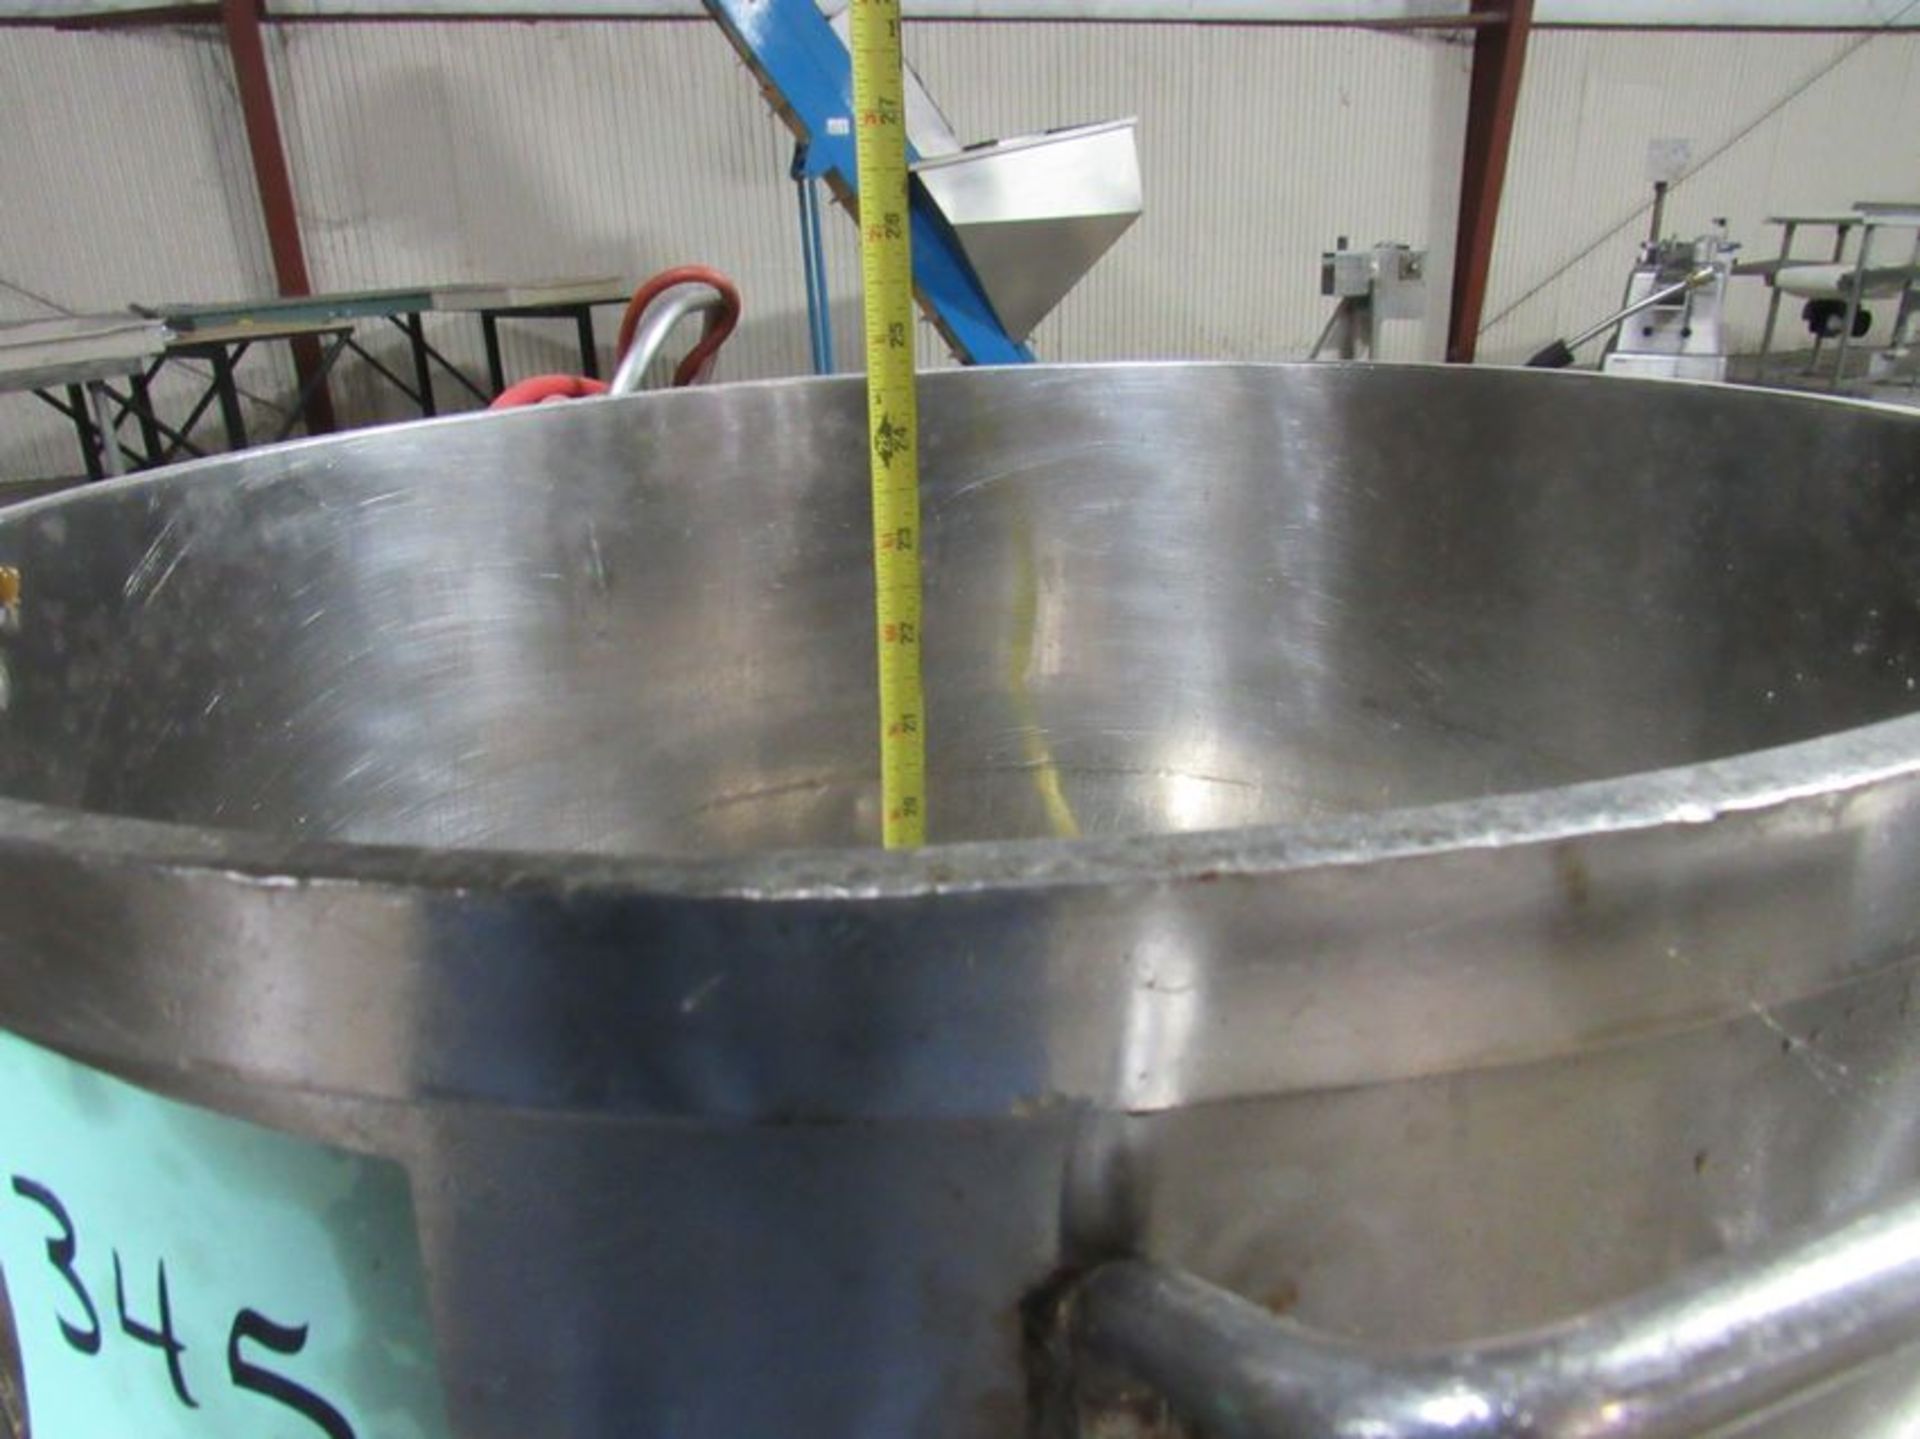 Stainless Steel Bowl and Base on Casters, 19" Diameter, 20" deep - approx. 20 gallons, handles - - Image 4 of 5